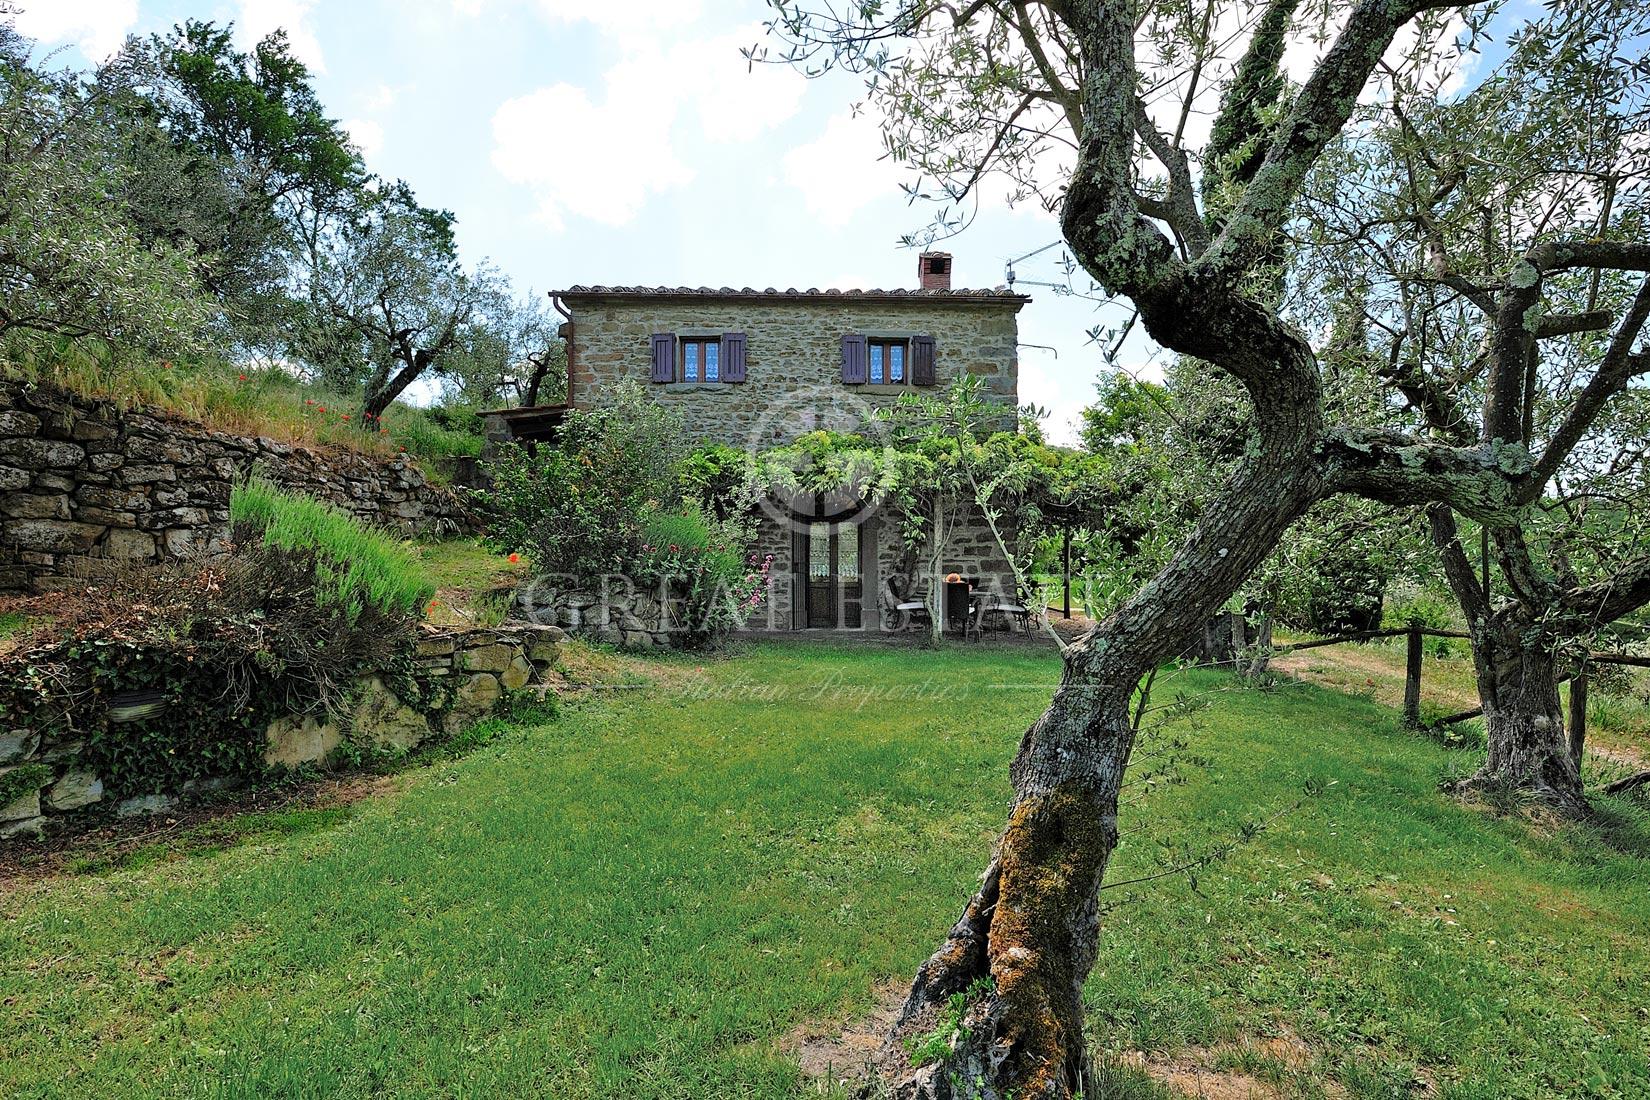 For sale cottage in  Cortona Toscana